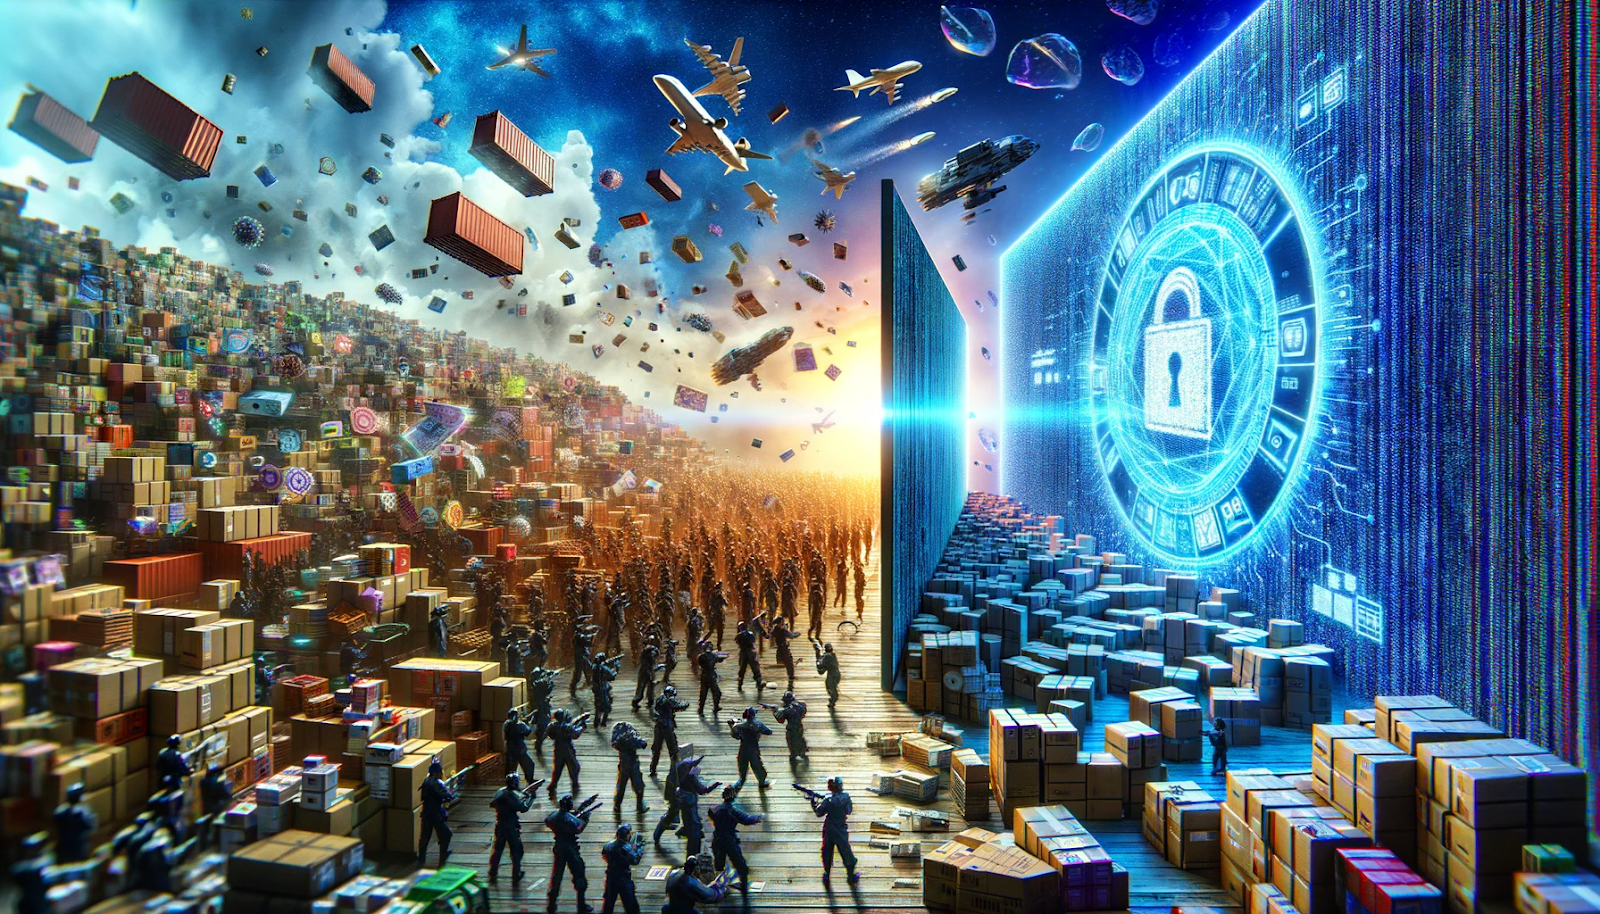 This wide-angle illustration vividly portrays the struggle against the counterfeit market in the multi-billion dollar industry. It juxtaposes the chaotic world of counterfeit products on the left with the secure, digital realm of NFT technology on the right, highlighting NFTs as a formidable solution difficult for counterfeiters to replicate. The image powerfully contrasts the disorder of counterfeiting with the orderly and secure potential of digital NFT solutions.